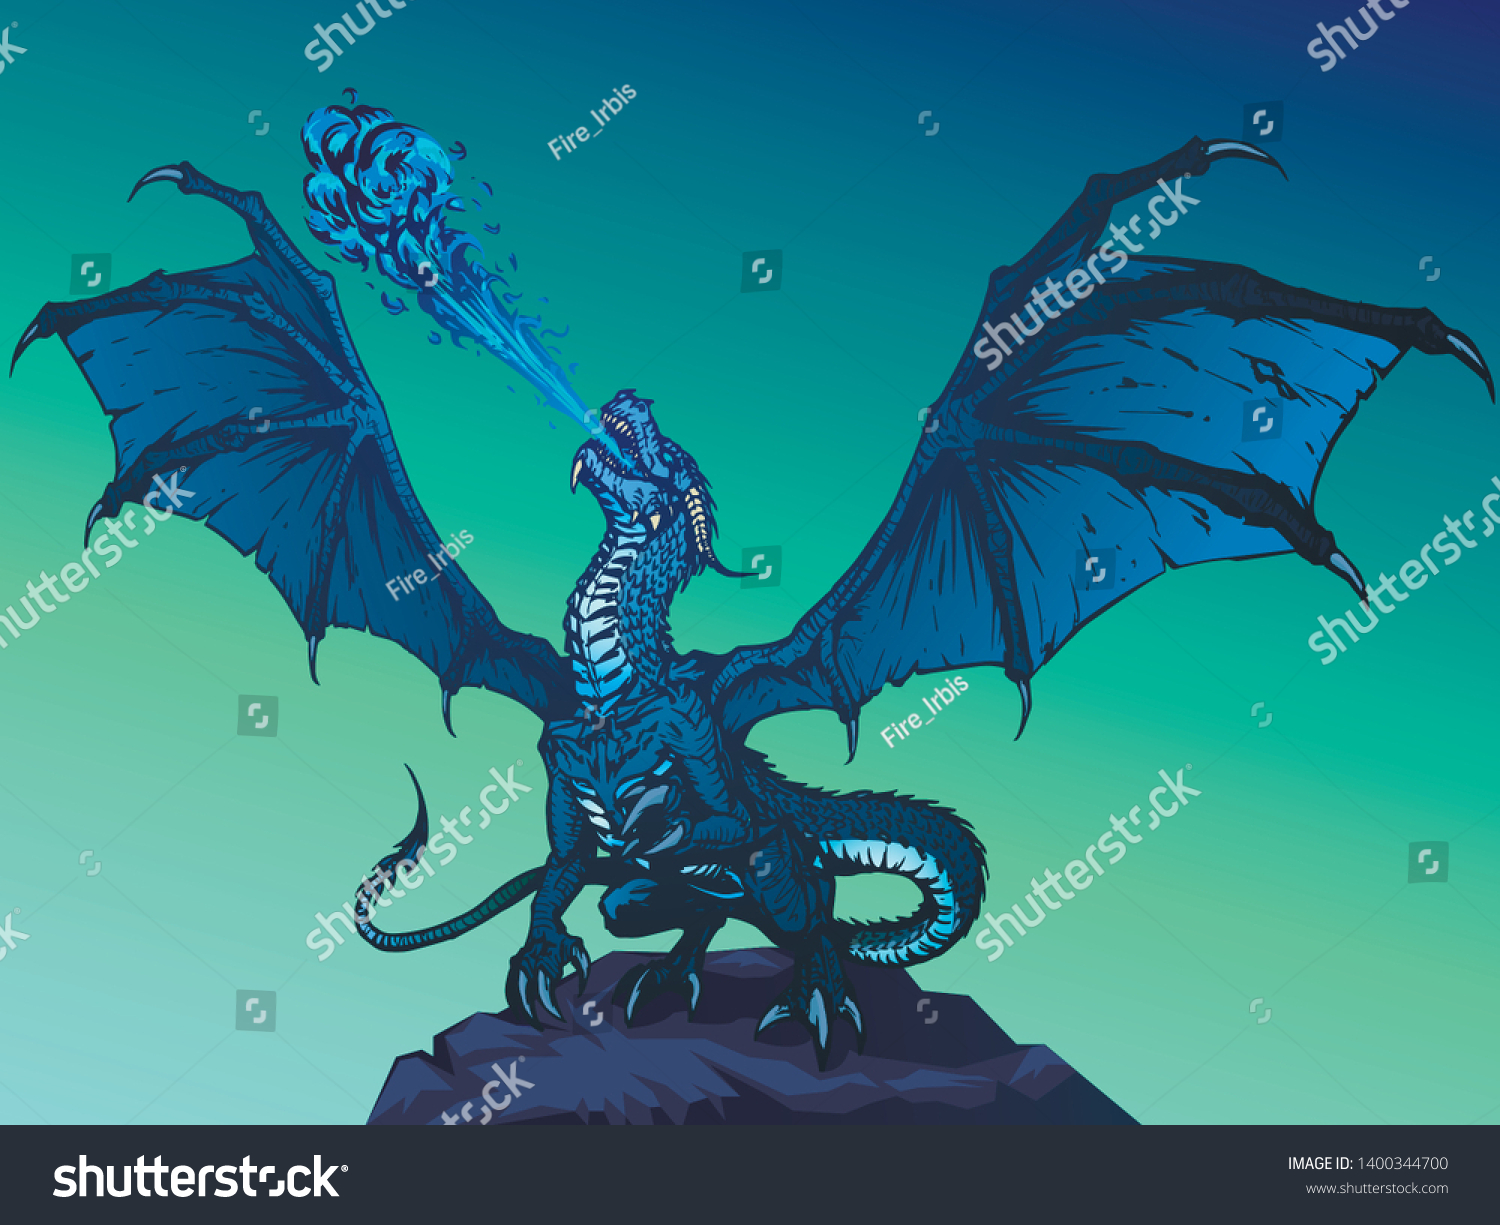 Dragon Fire Breathing Spreading Wings Comic Stock Vector Royalty Free 1400344700 Shutterstock 6181